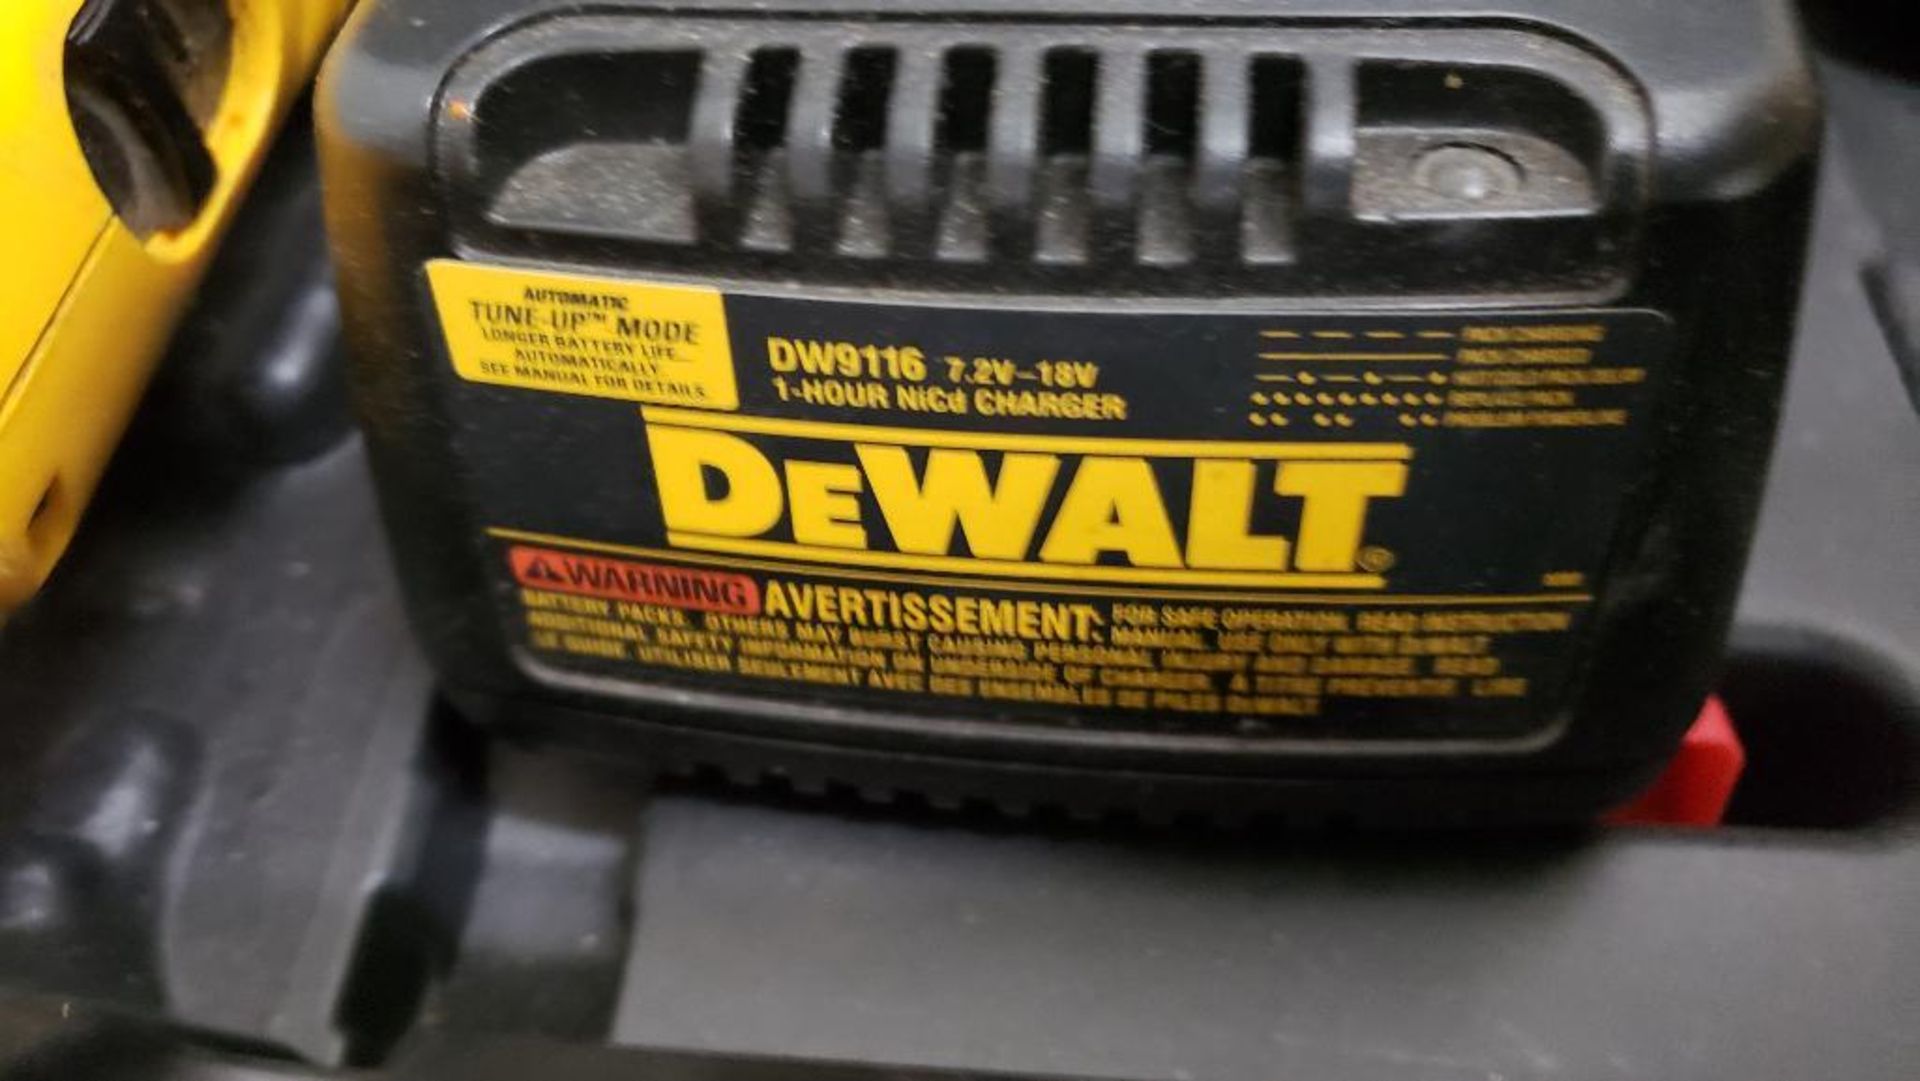 DeWalt 18v corldess drill and saw kit. Includes case and charger. - Image 2 of 6